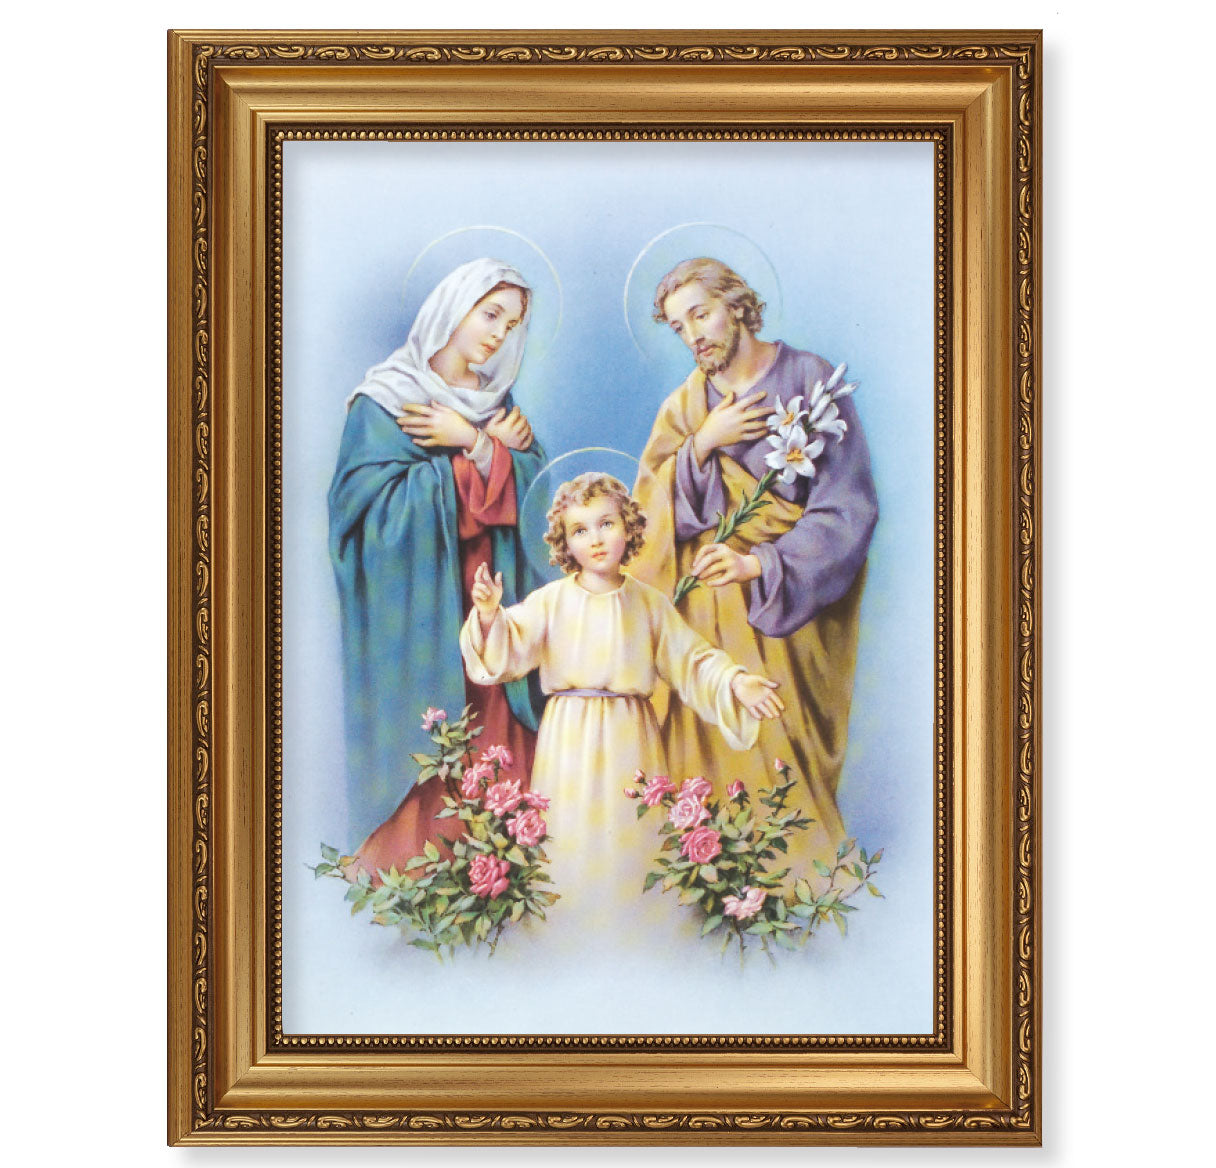 The Holy Family Antique Picture Framed Wall Art Decor Extra Large, Antique Gold-Leaf Frame with Acanthus-Leaf Trim and Beaded Lip